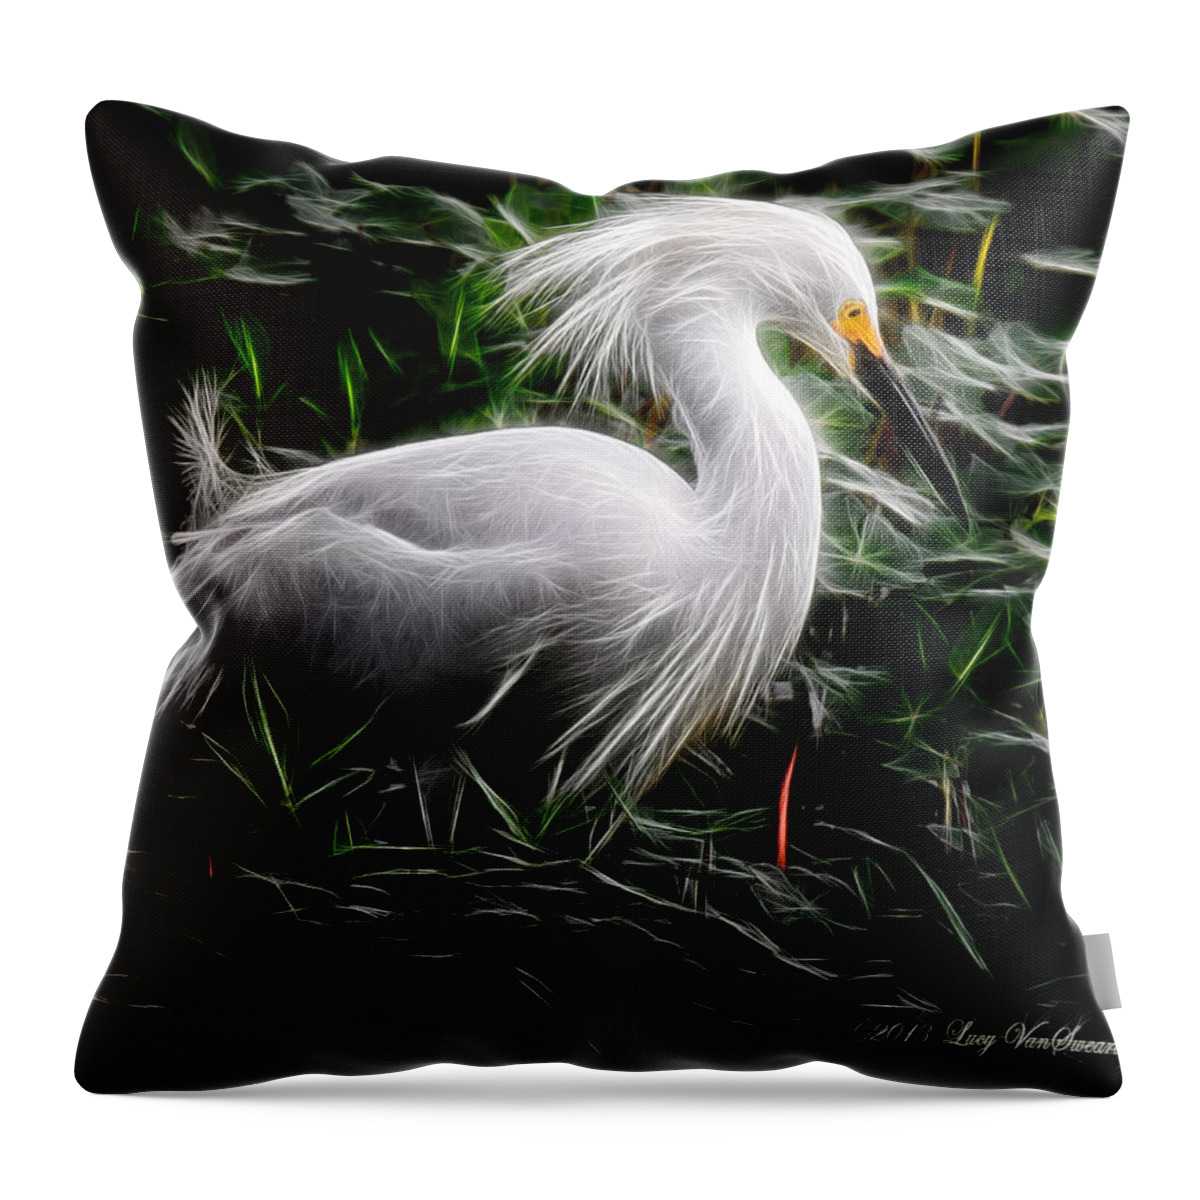 Egret Throw Pillow featuring the photograph Fancy Feathers by Lucy VanSwearingen